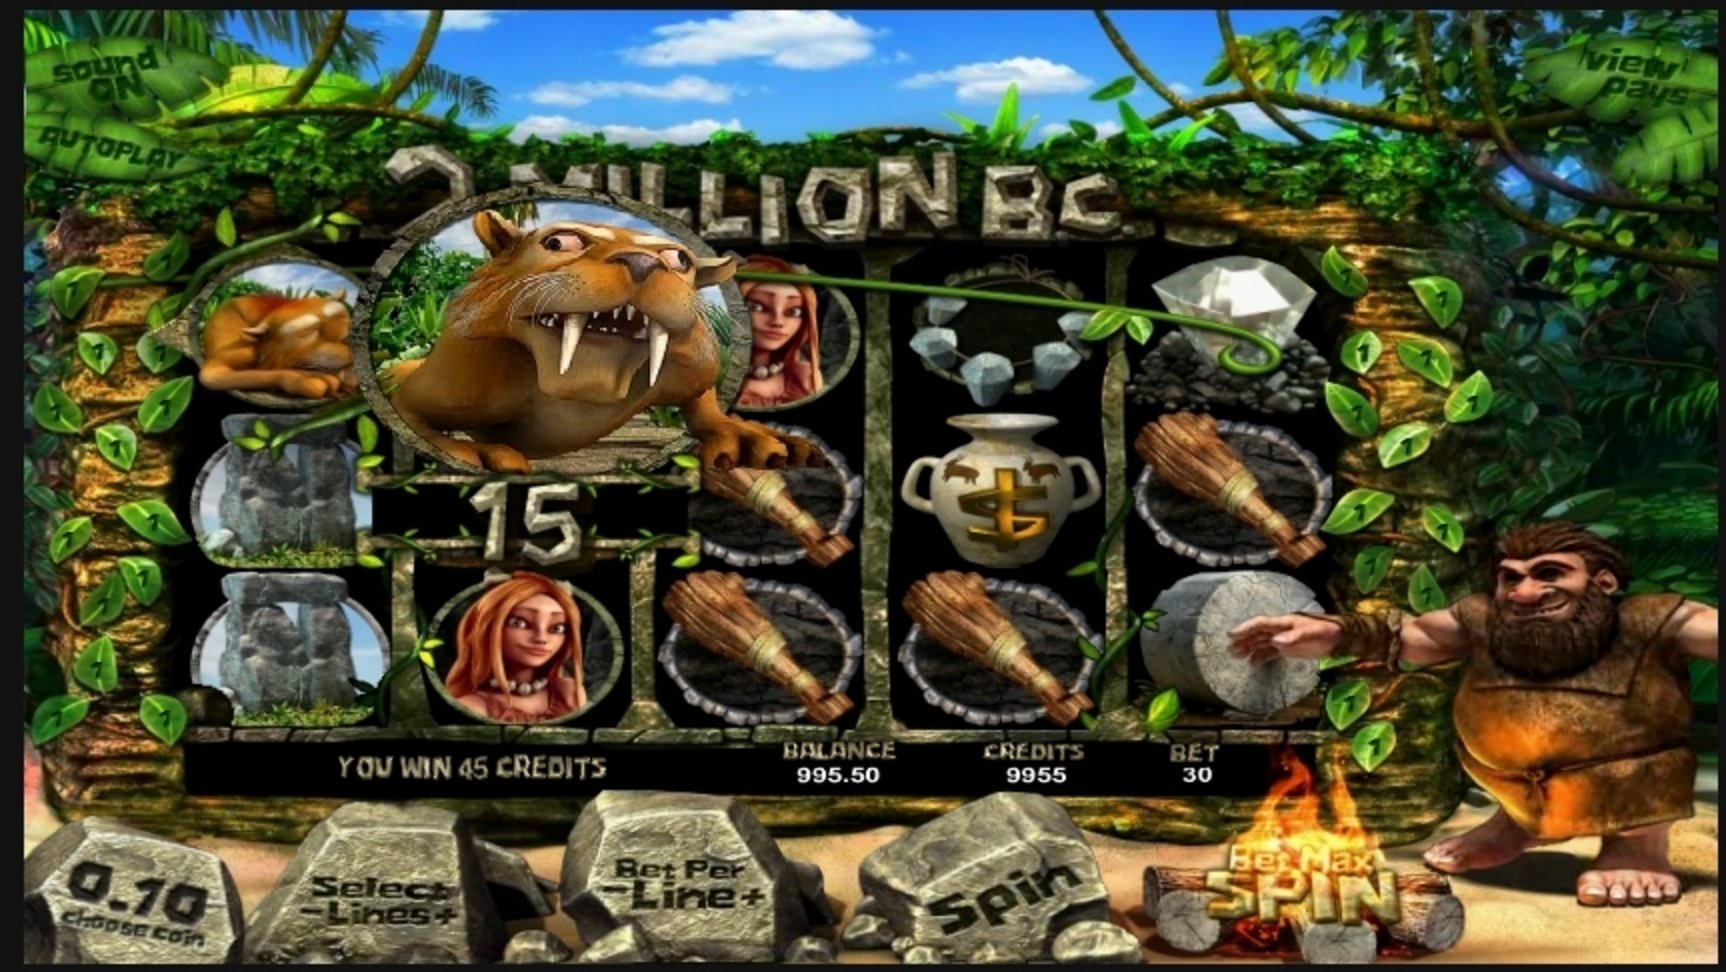 Win Money in 2 Million B.C. Free Slot Game by Betsoft